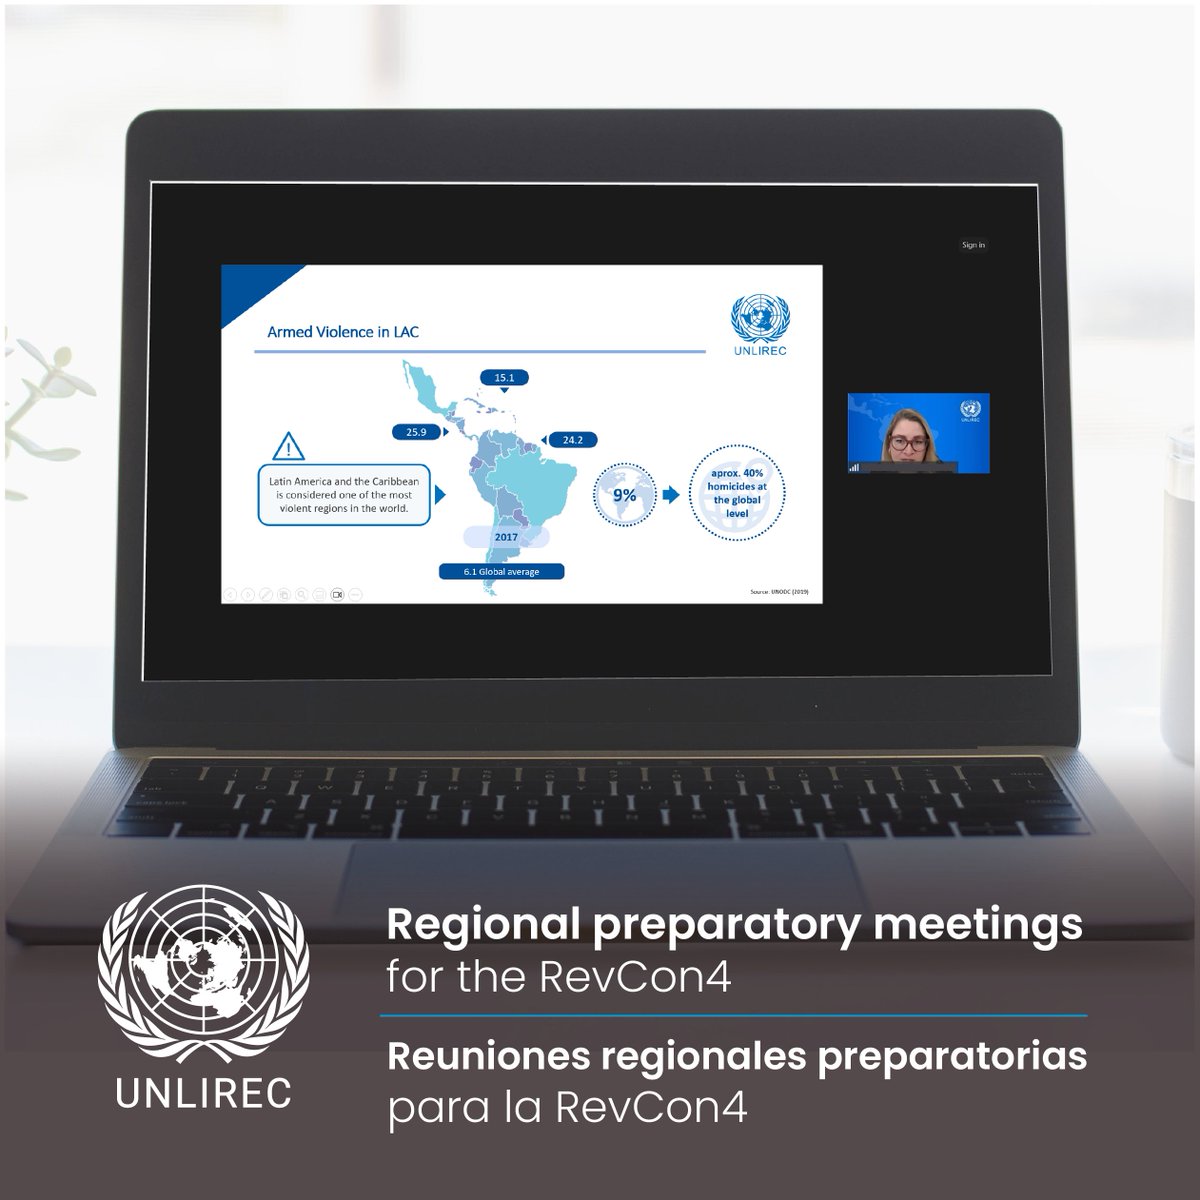 This week, Caribbean States begin their regional preparations ahead of #RevCon4, reflecting on challenges and opportunities in implementing the #UNPoA.

Learn more unlirec.org/publicacion/re…